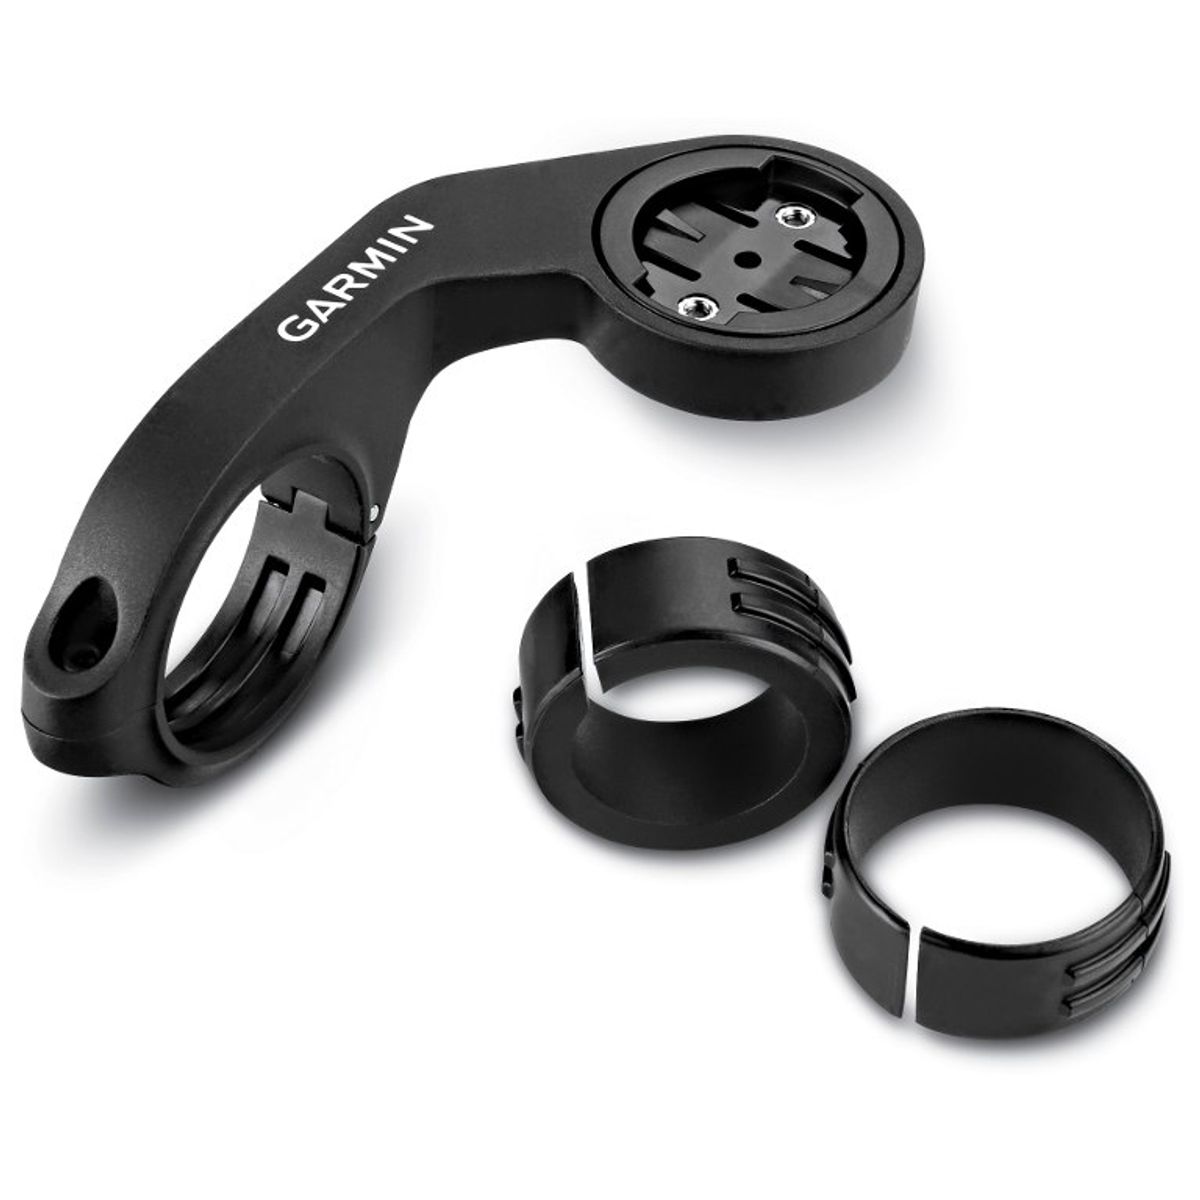 Garmin Edge extended out front bike mount